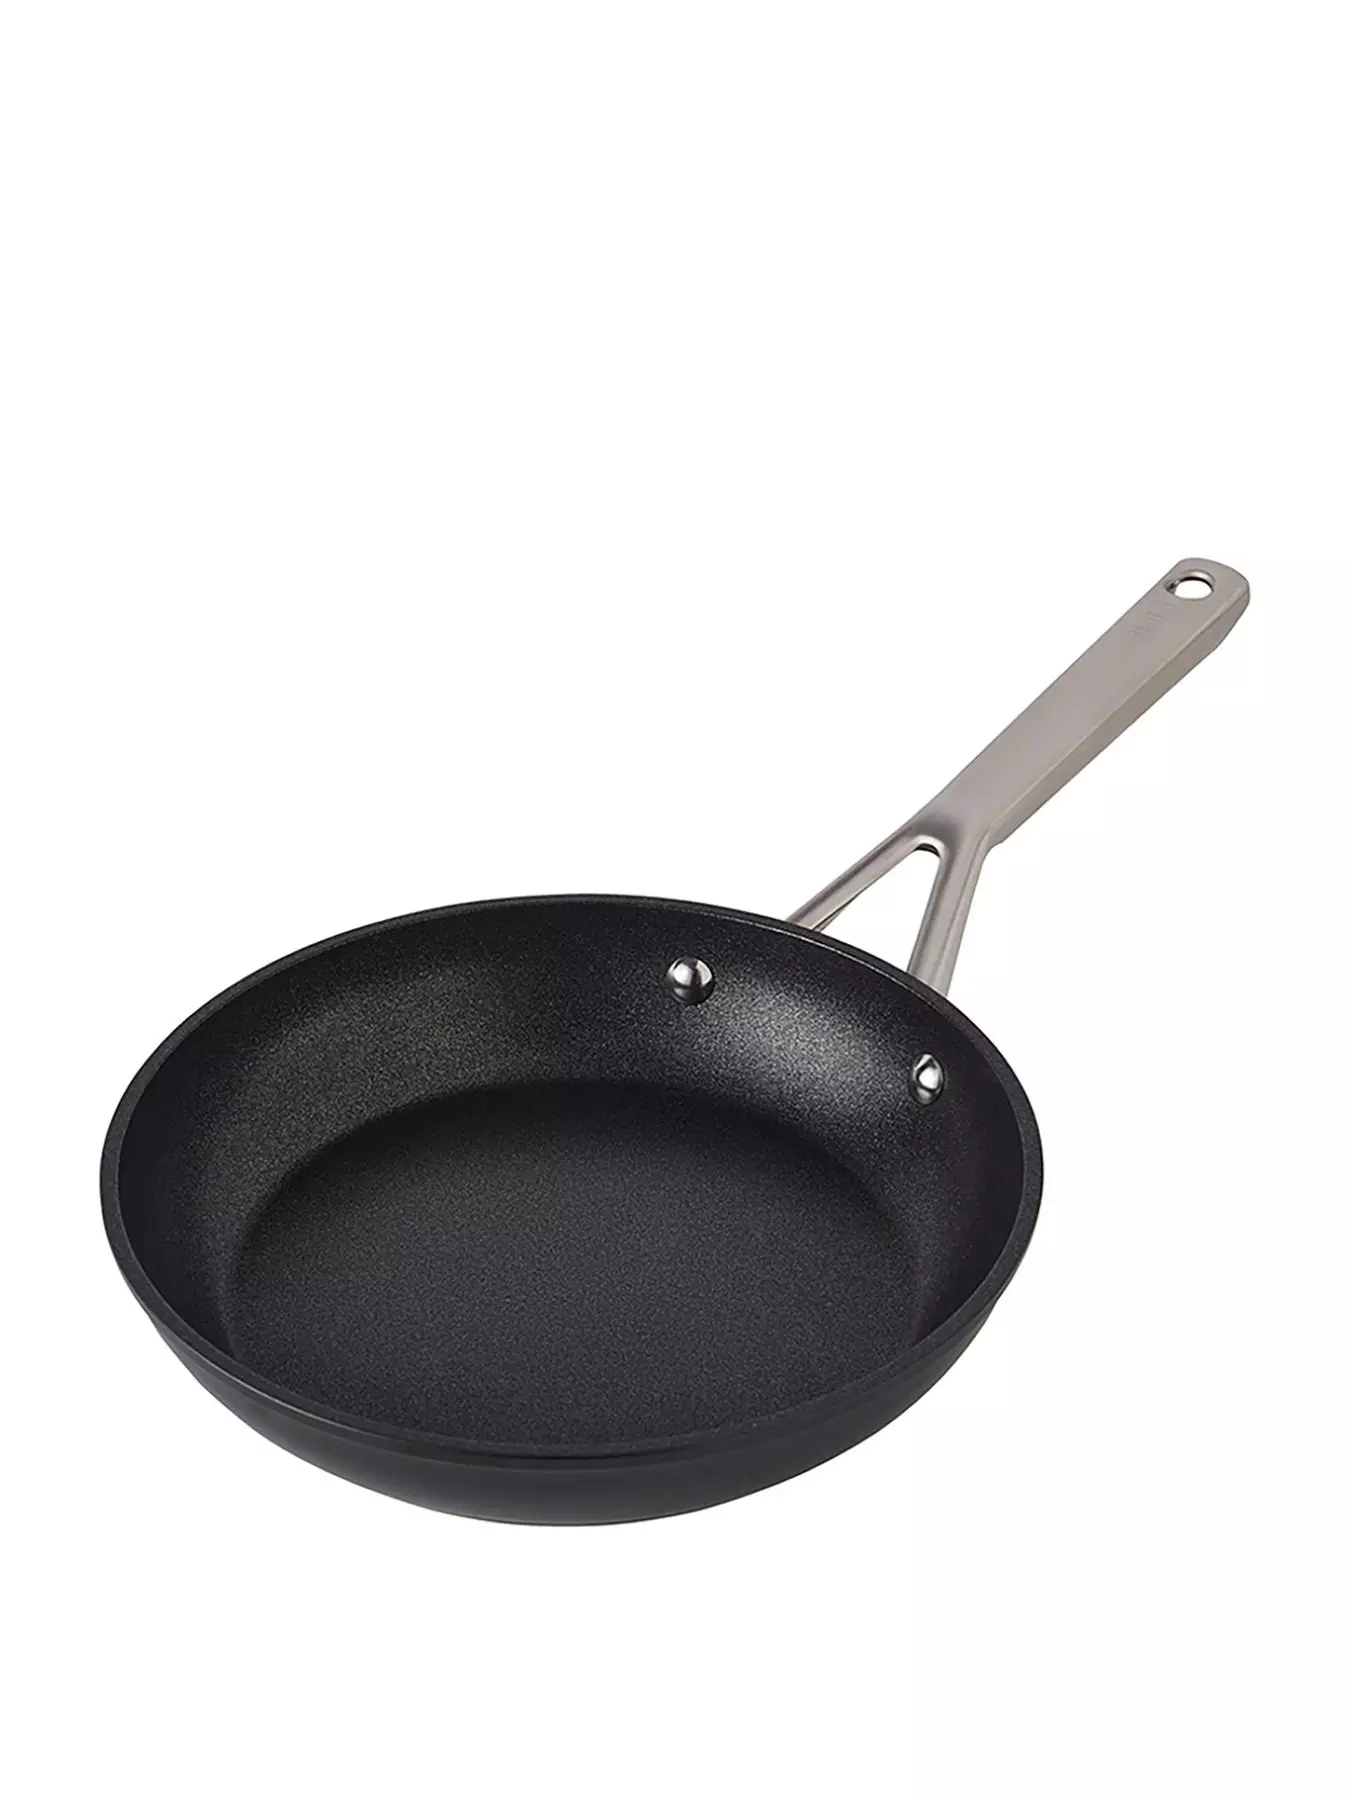 Mini Frying Pan For One Egg, 4.7 12cm Mini Egg Frying Pan With Handle Heat  Resistant Non Stick Pot, Portable Camping Cooking